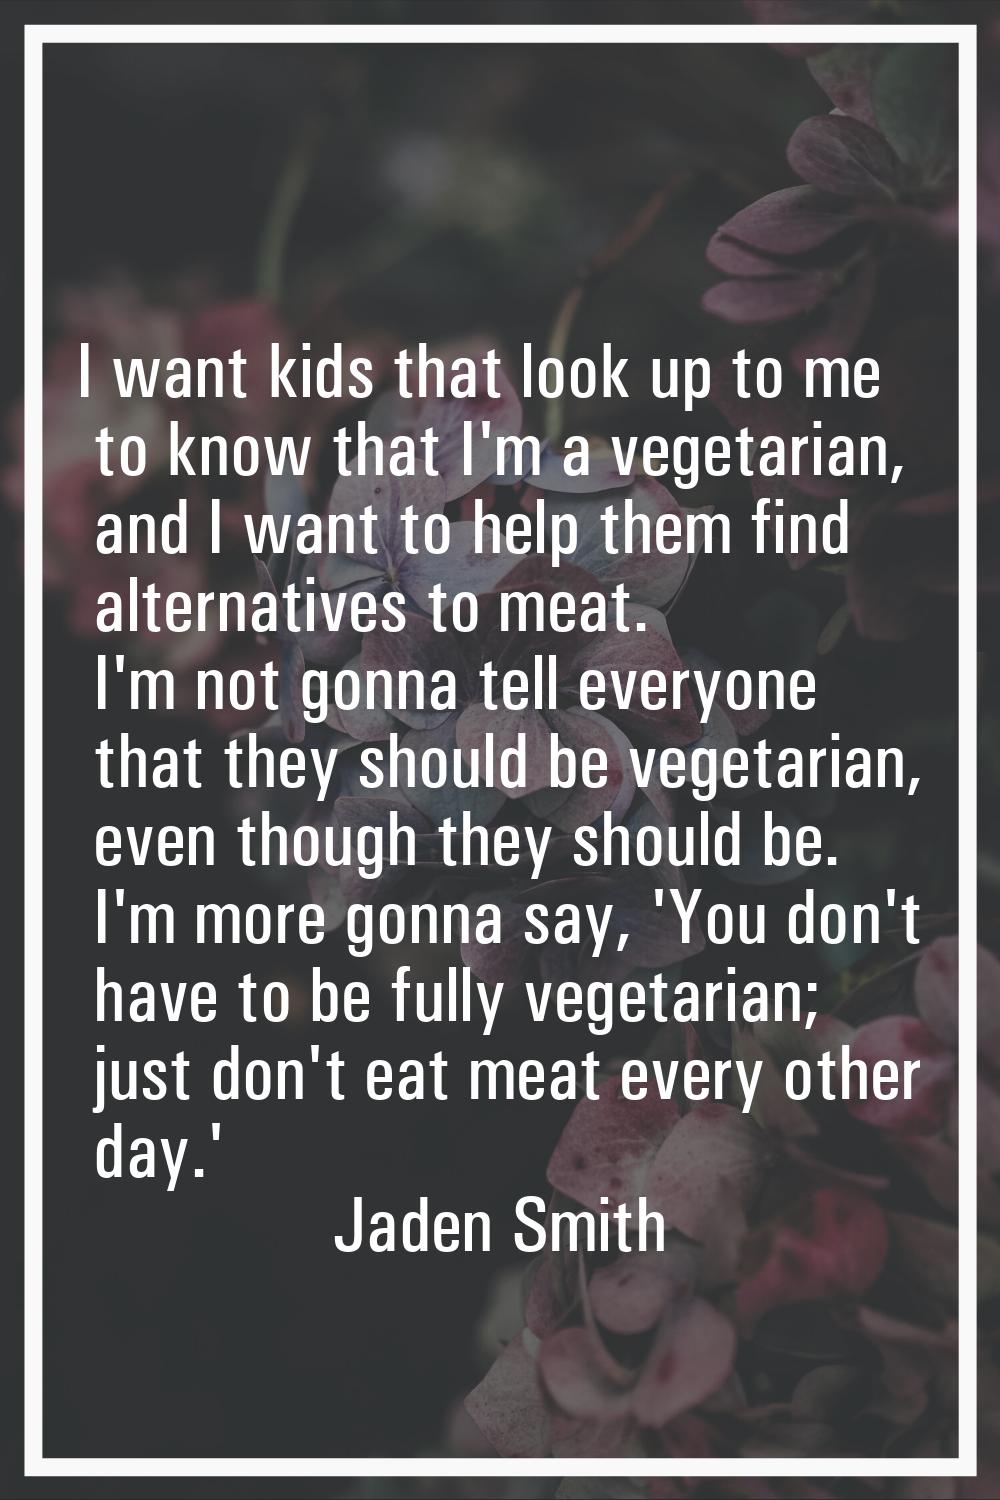 I want kids that look up to me to know that I'm a vegetarian, and I want to help them find alternat